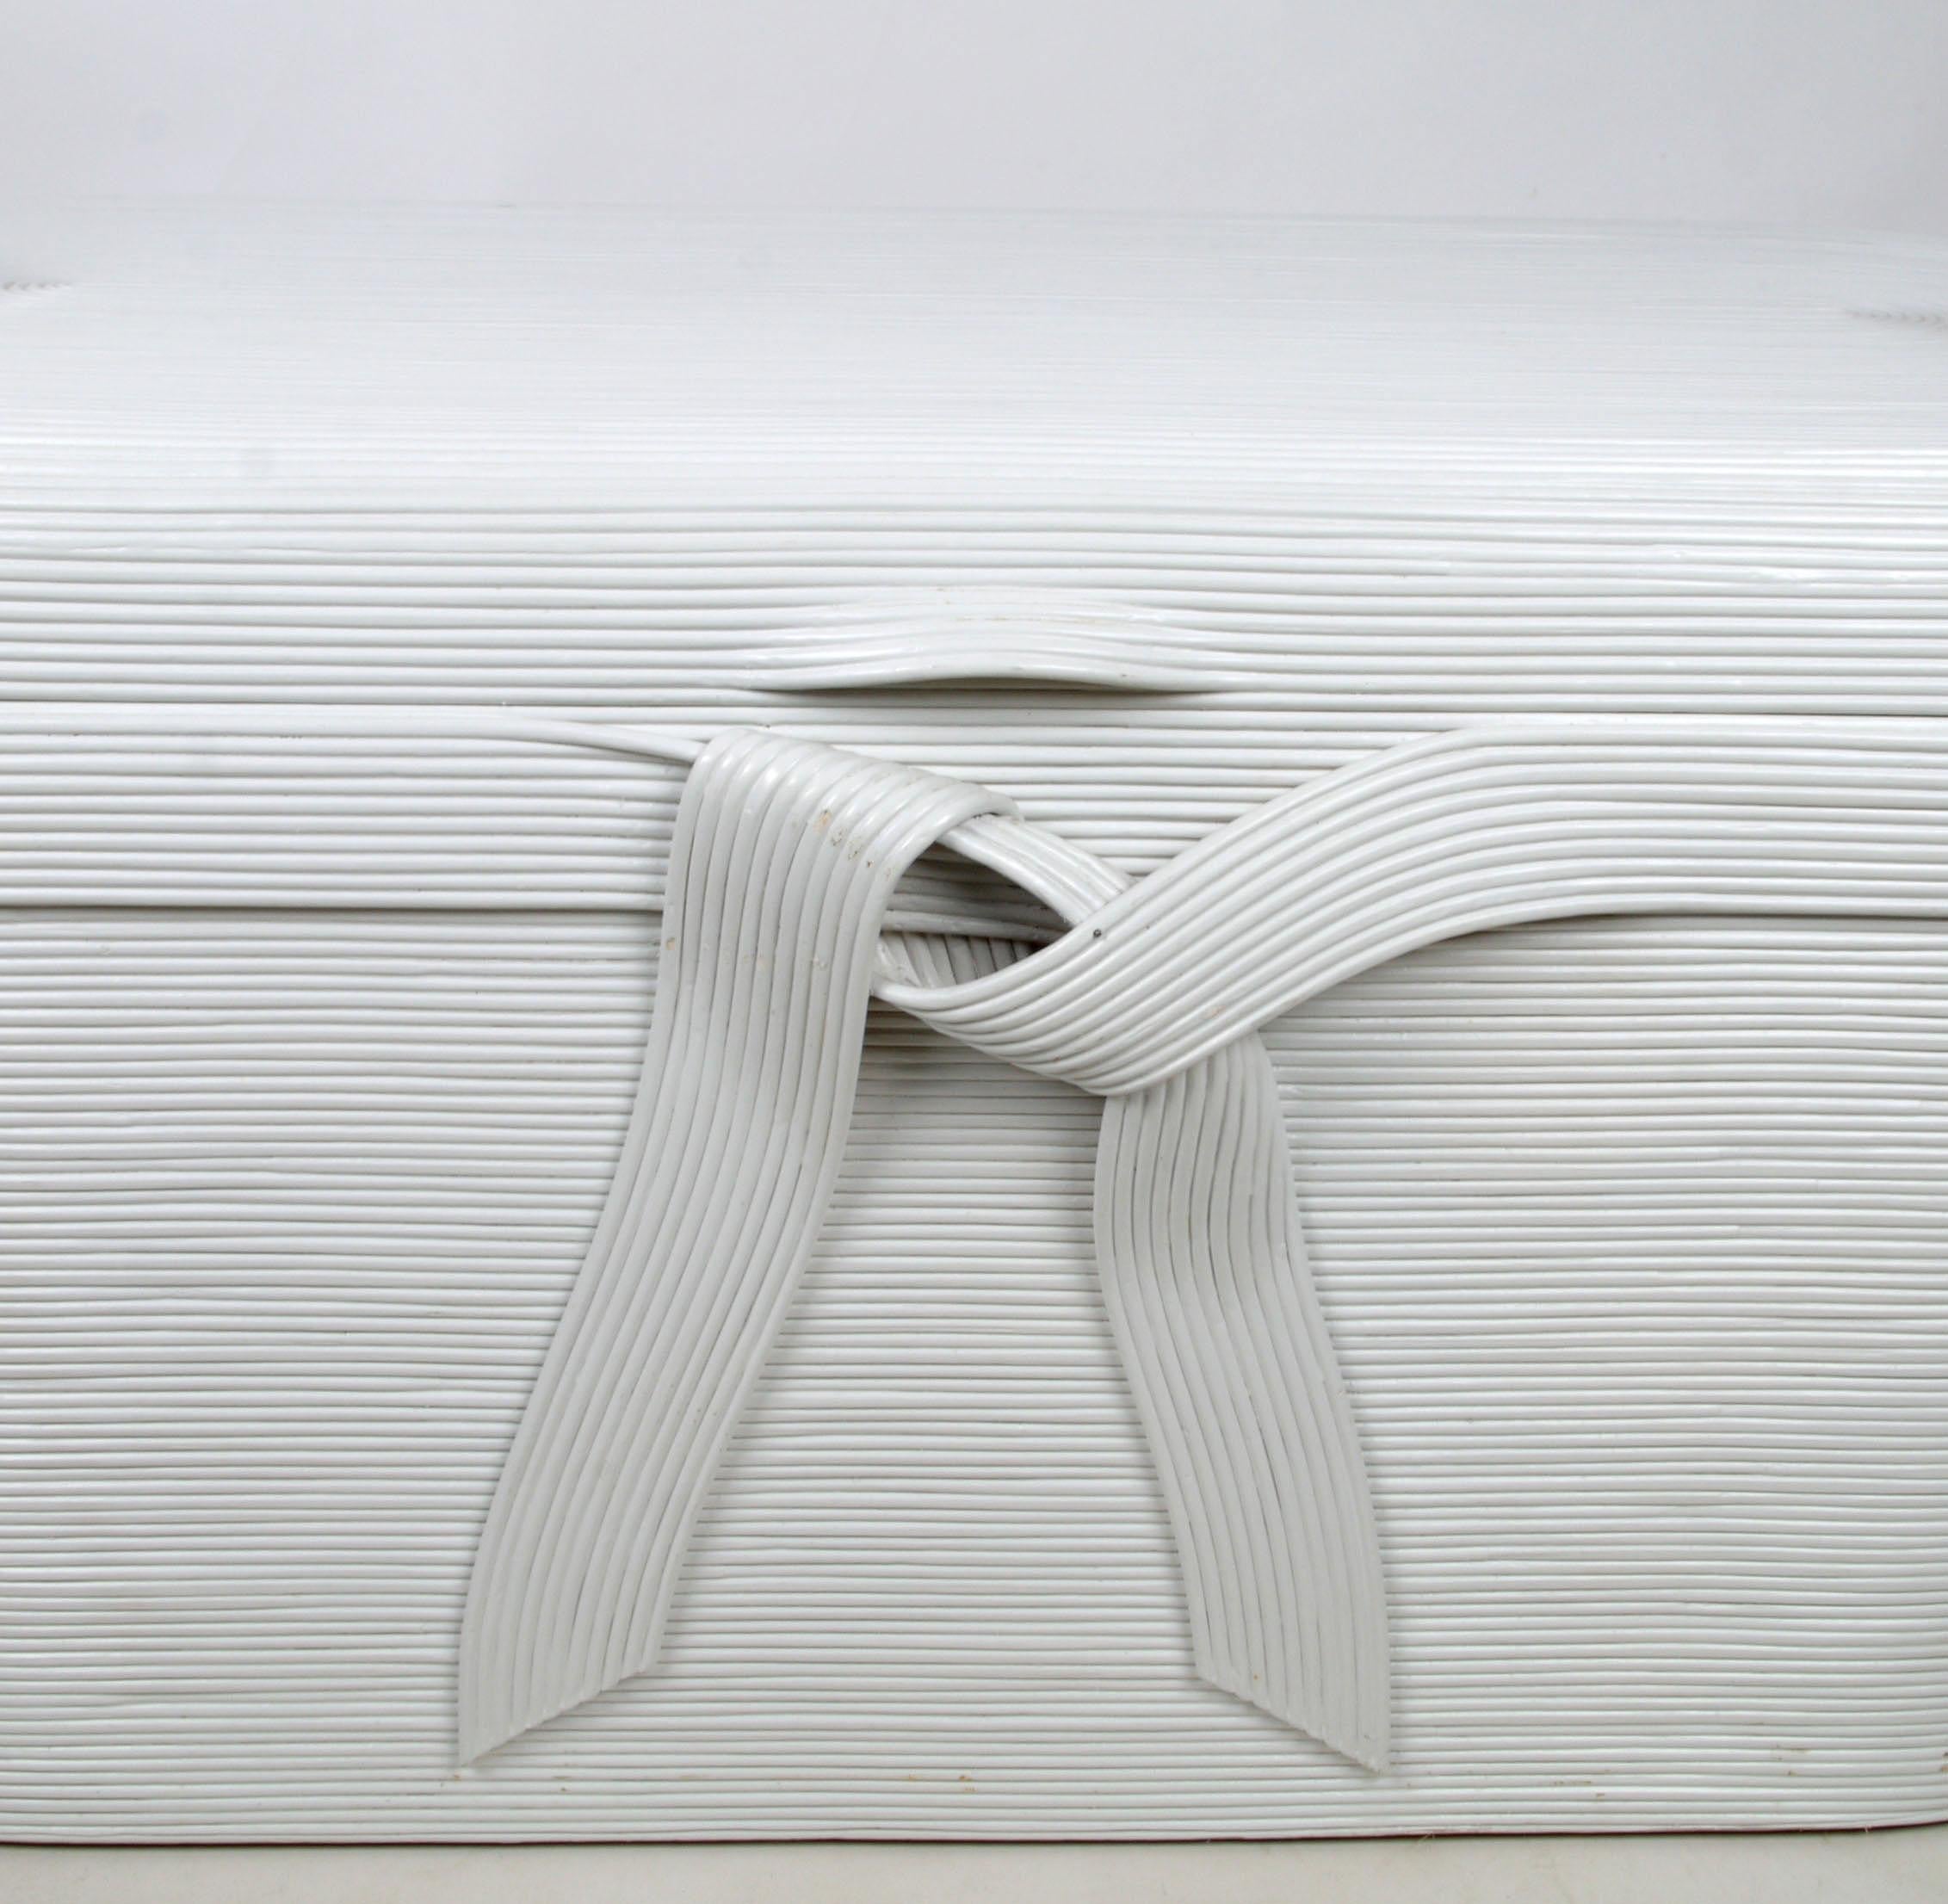 Italian Mid-Century Modern White Bamboo and Wood Chest, Blanket Chest